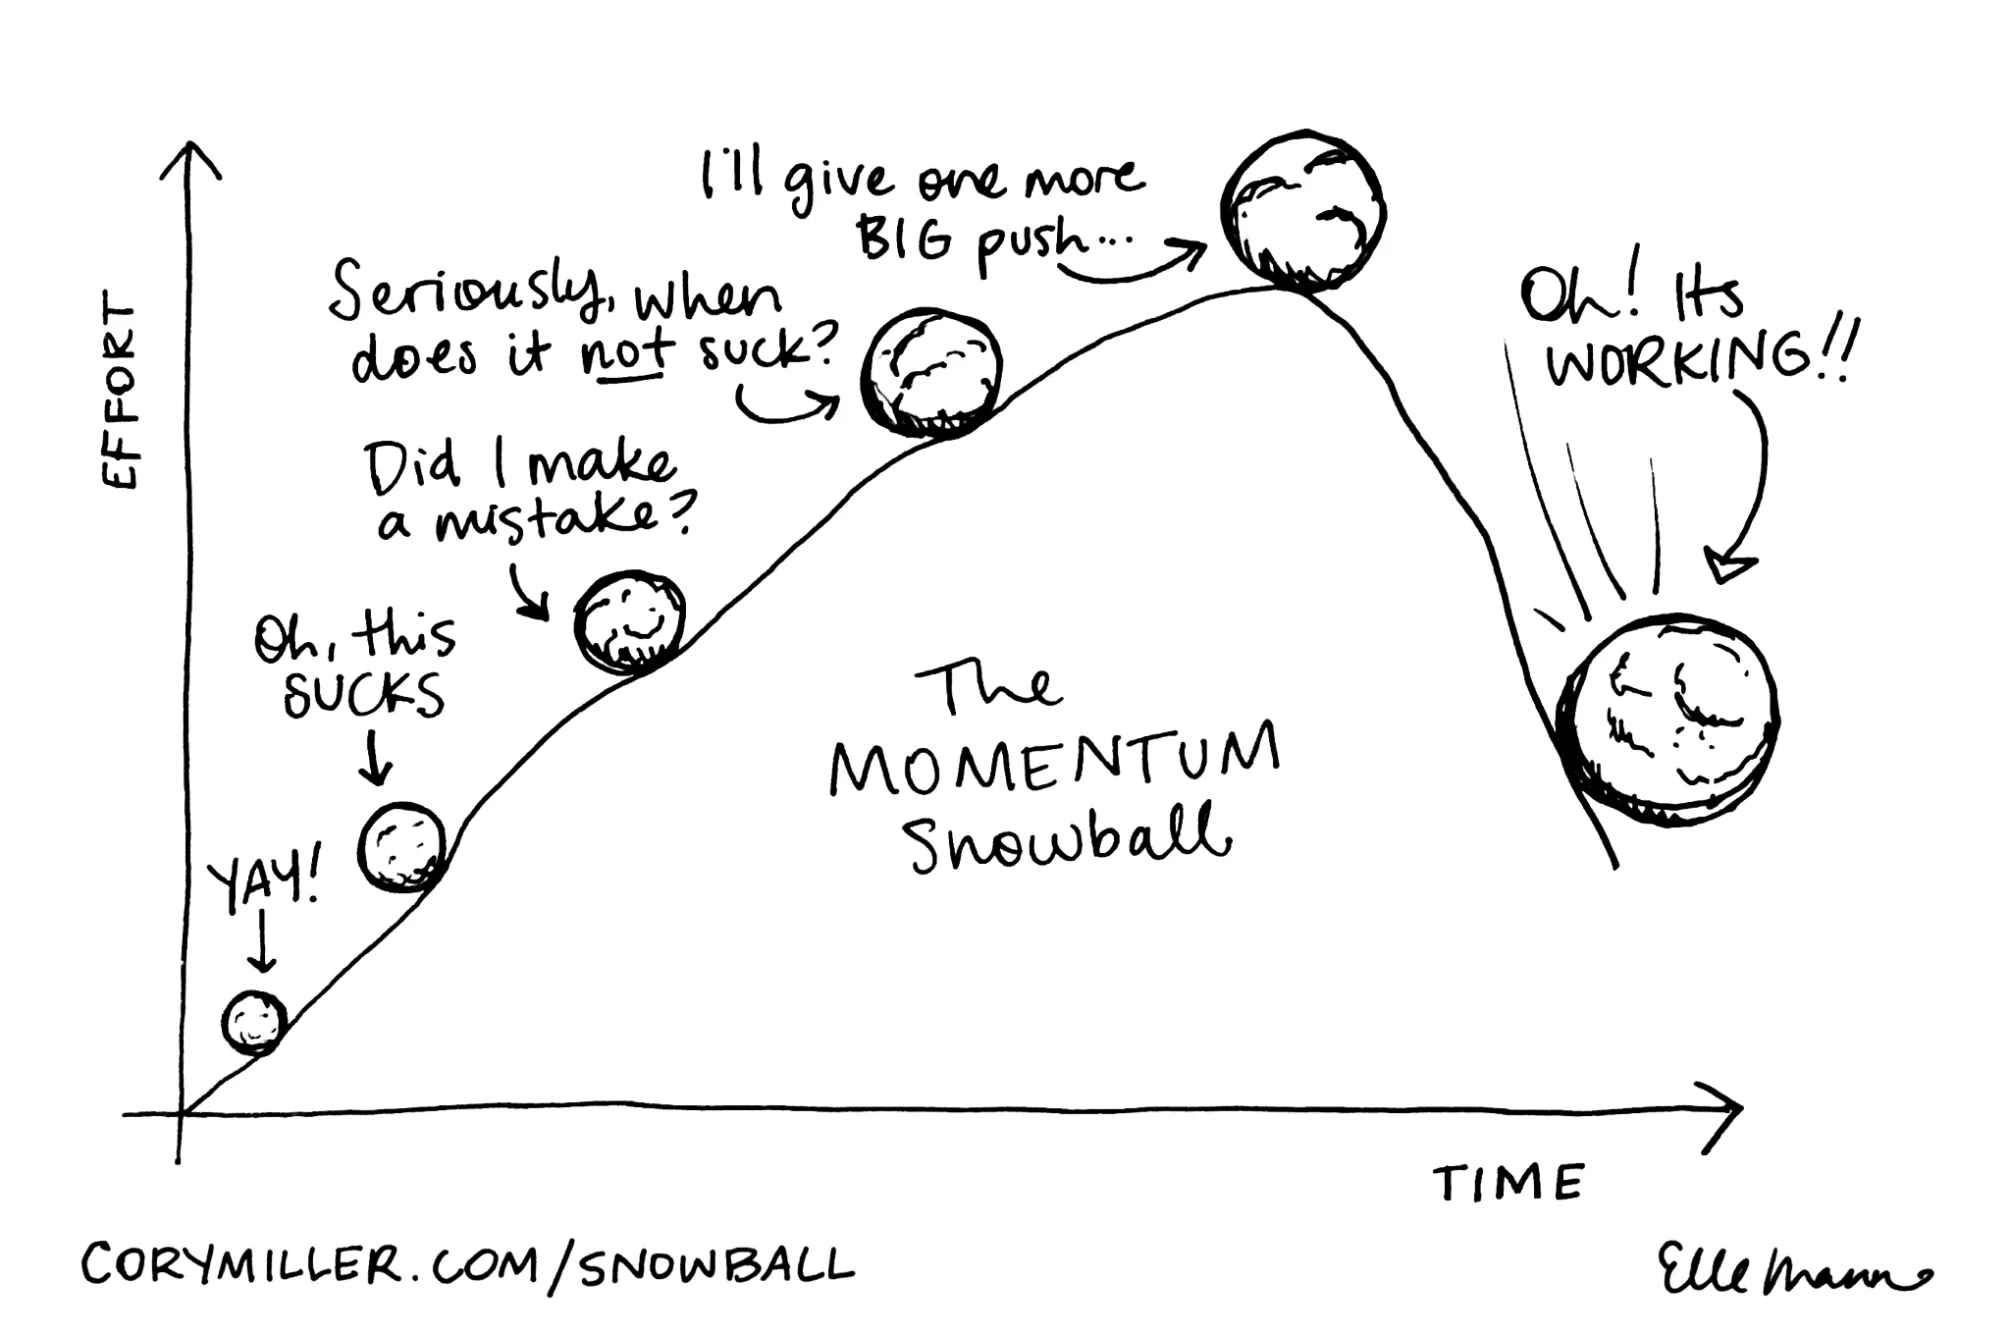 The Snowball of Momentum - Cory Miller